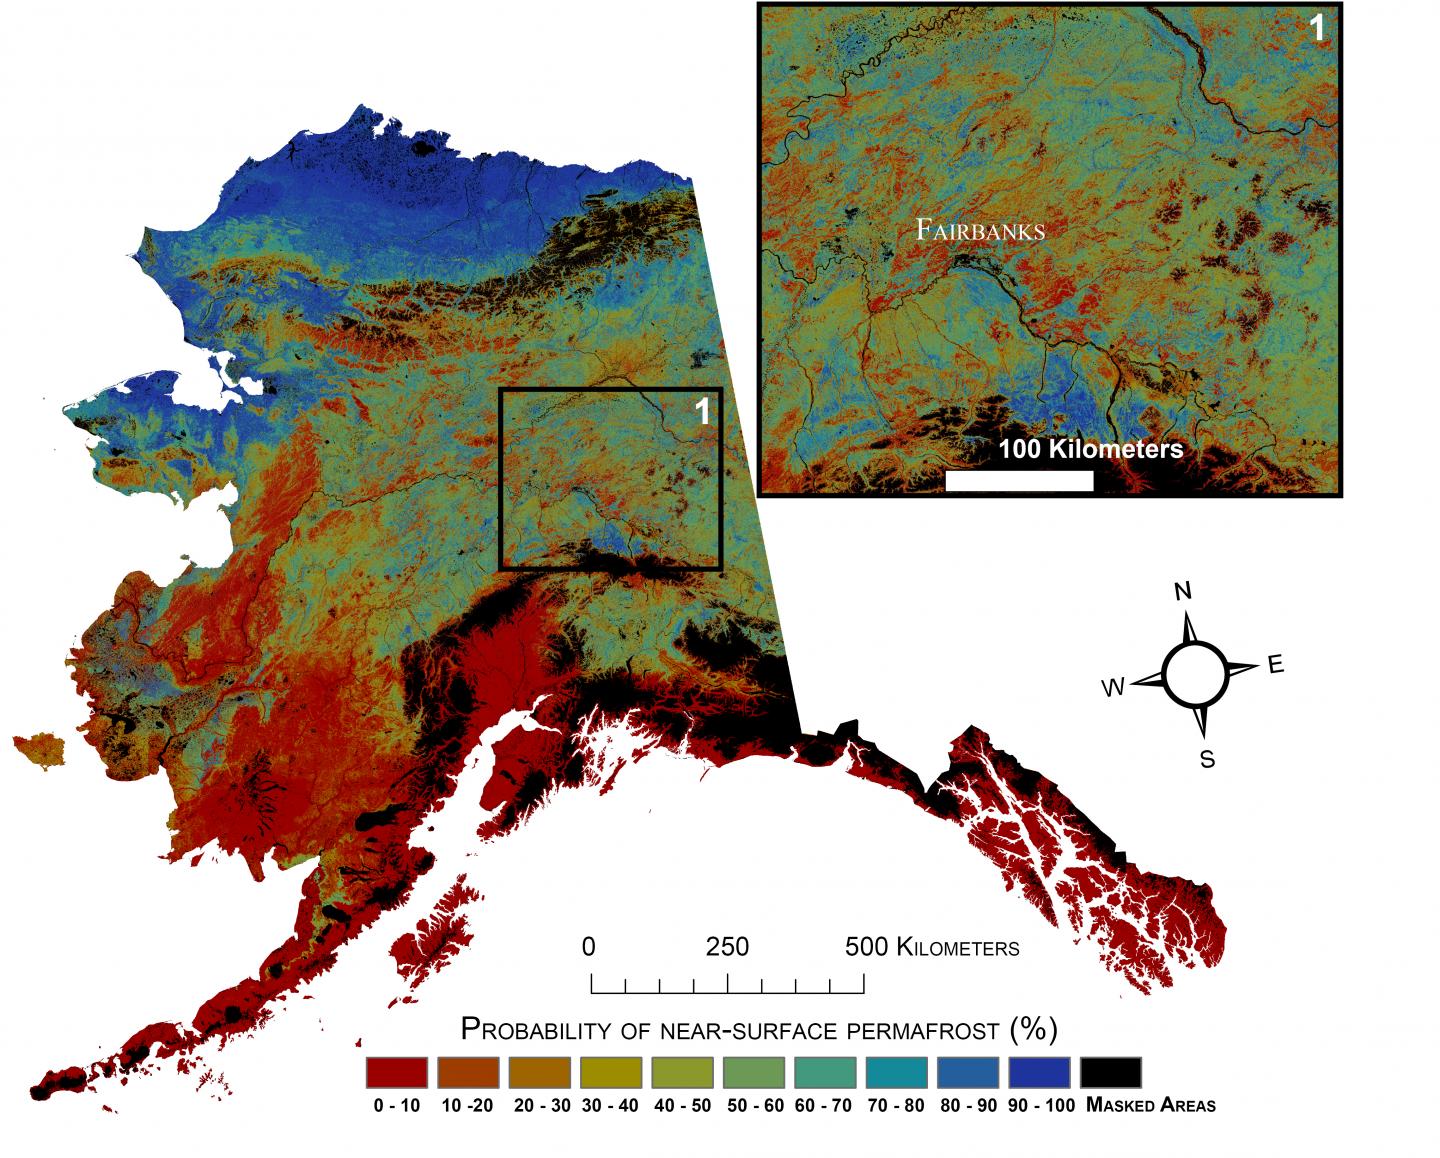 Current Probability of Near-Surface Permafrost in Alaska